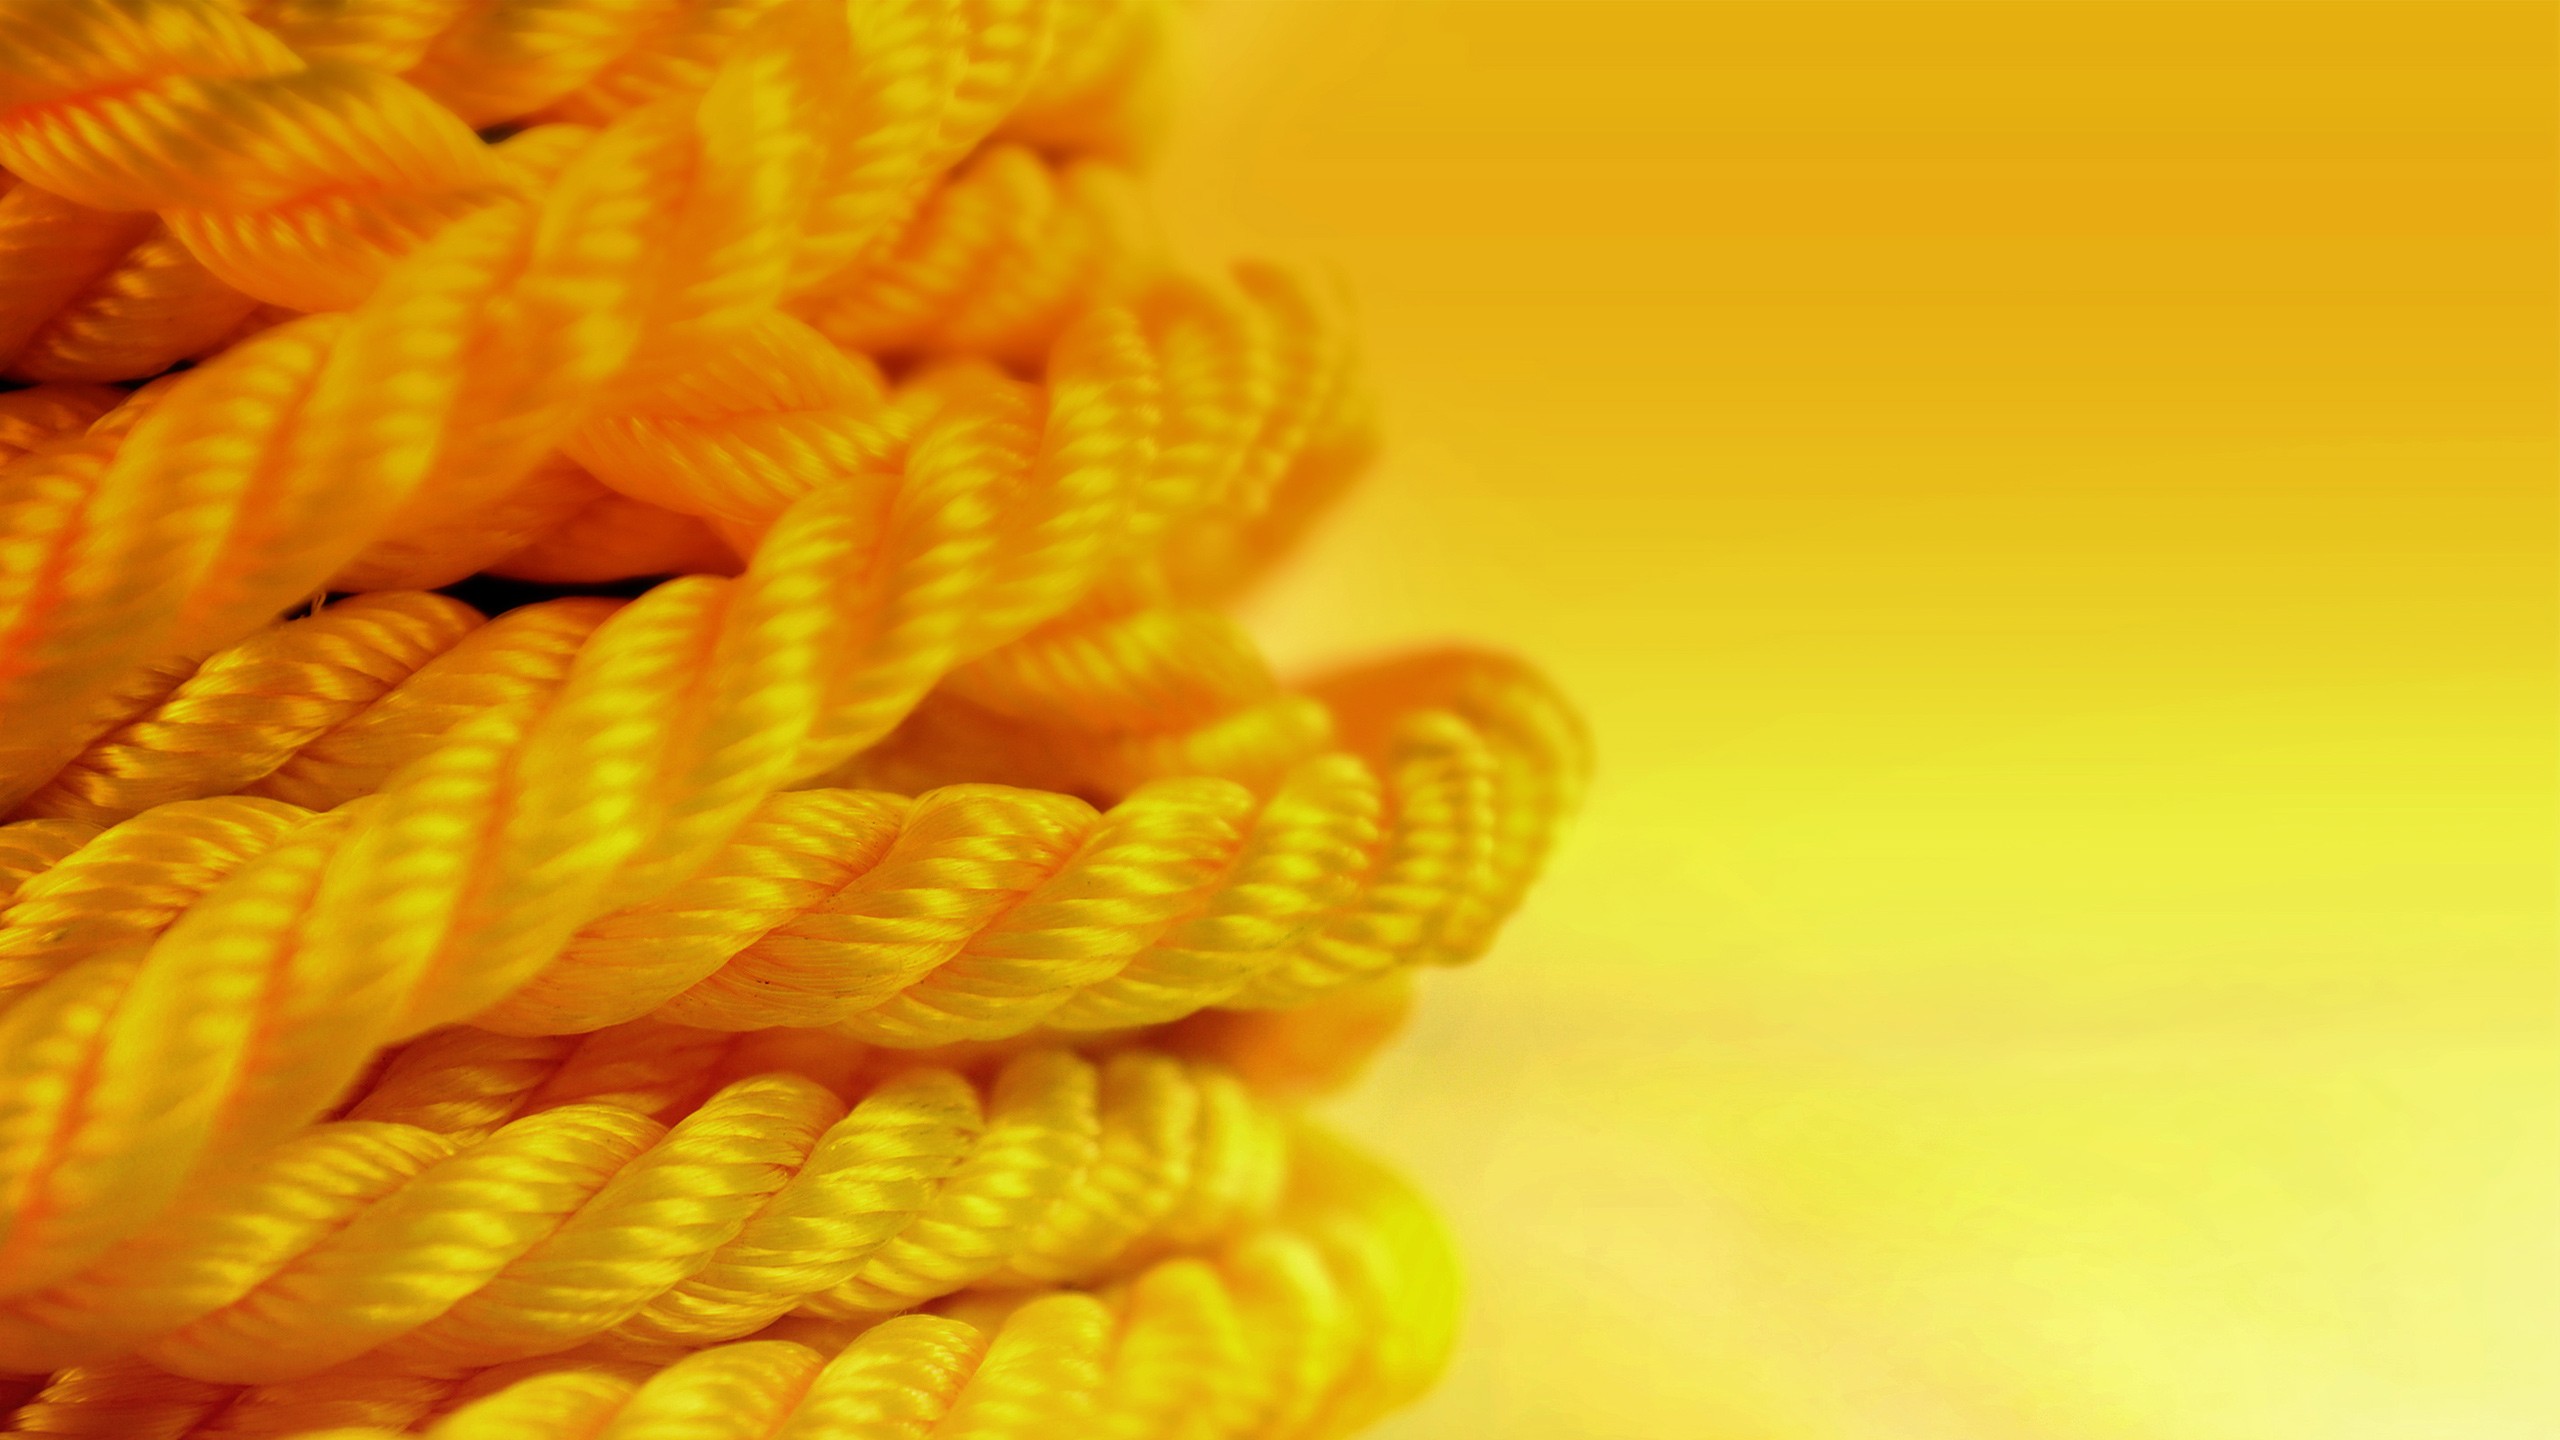 yellow rope wallpaper background